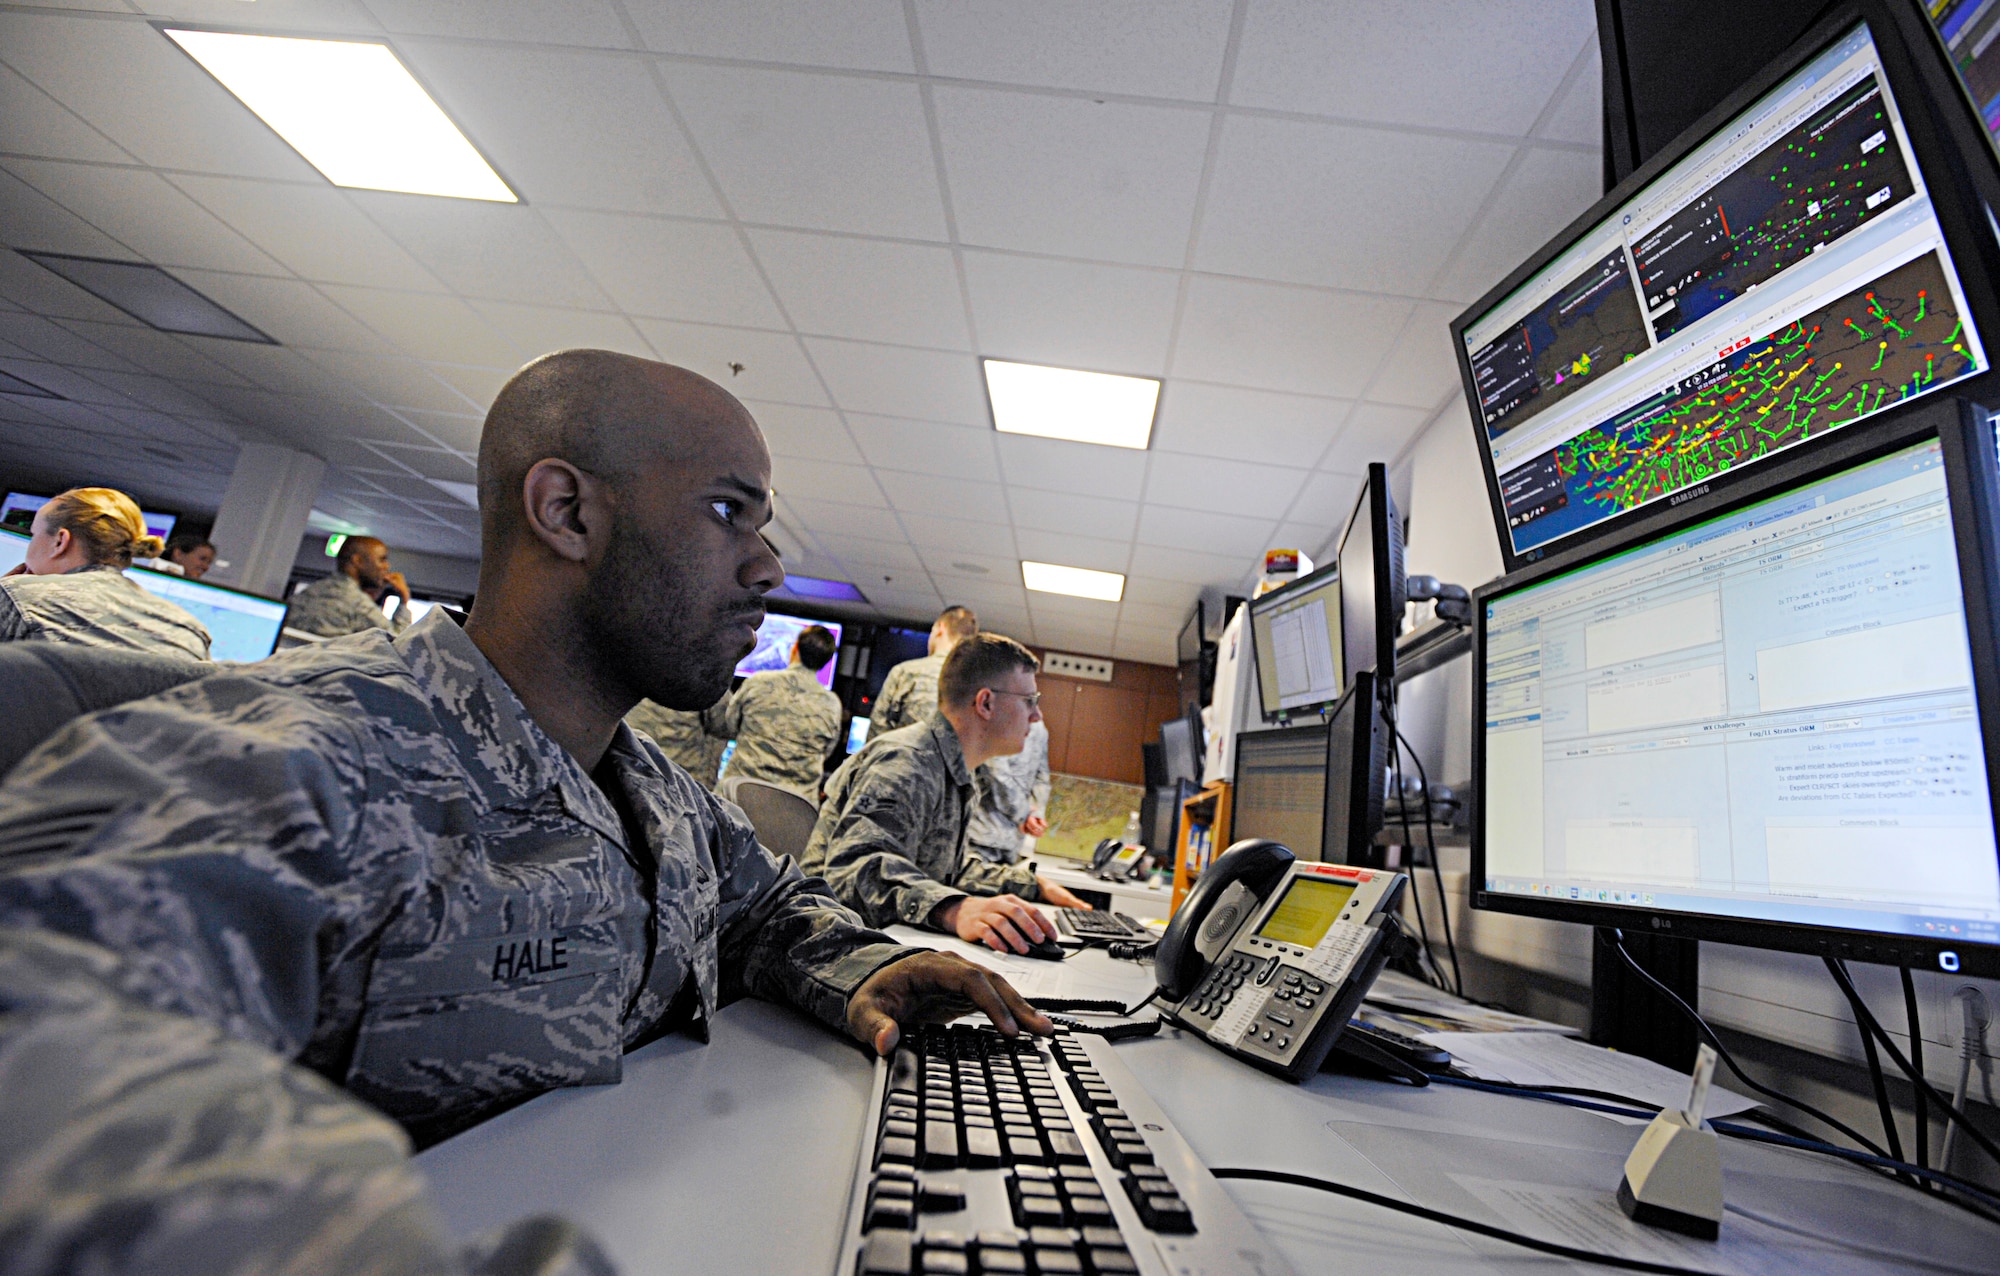 Staff Sgt. James Hale, 21st Operational Weather Squadron weather forecaster, monitors the weather patterns for northern Europe Feb. 22, 2016, at Ramstein Air Base, Germany. The 21st OWS is responsible for providing timely and accurate weather intelligence for any mission operation within the area of responsibility for U.S. European Command and U.S. Africa Command. (U.S. Air Force photo/Staff Sgt. Timothy Moore)